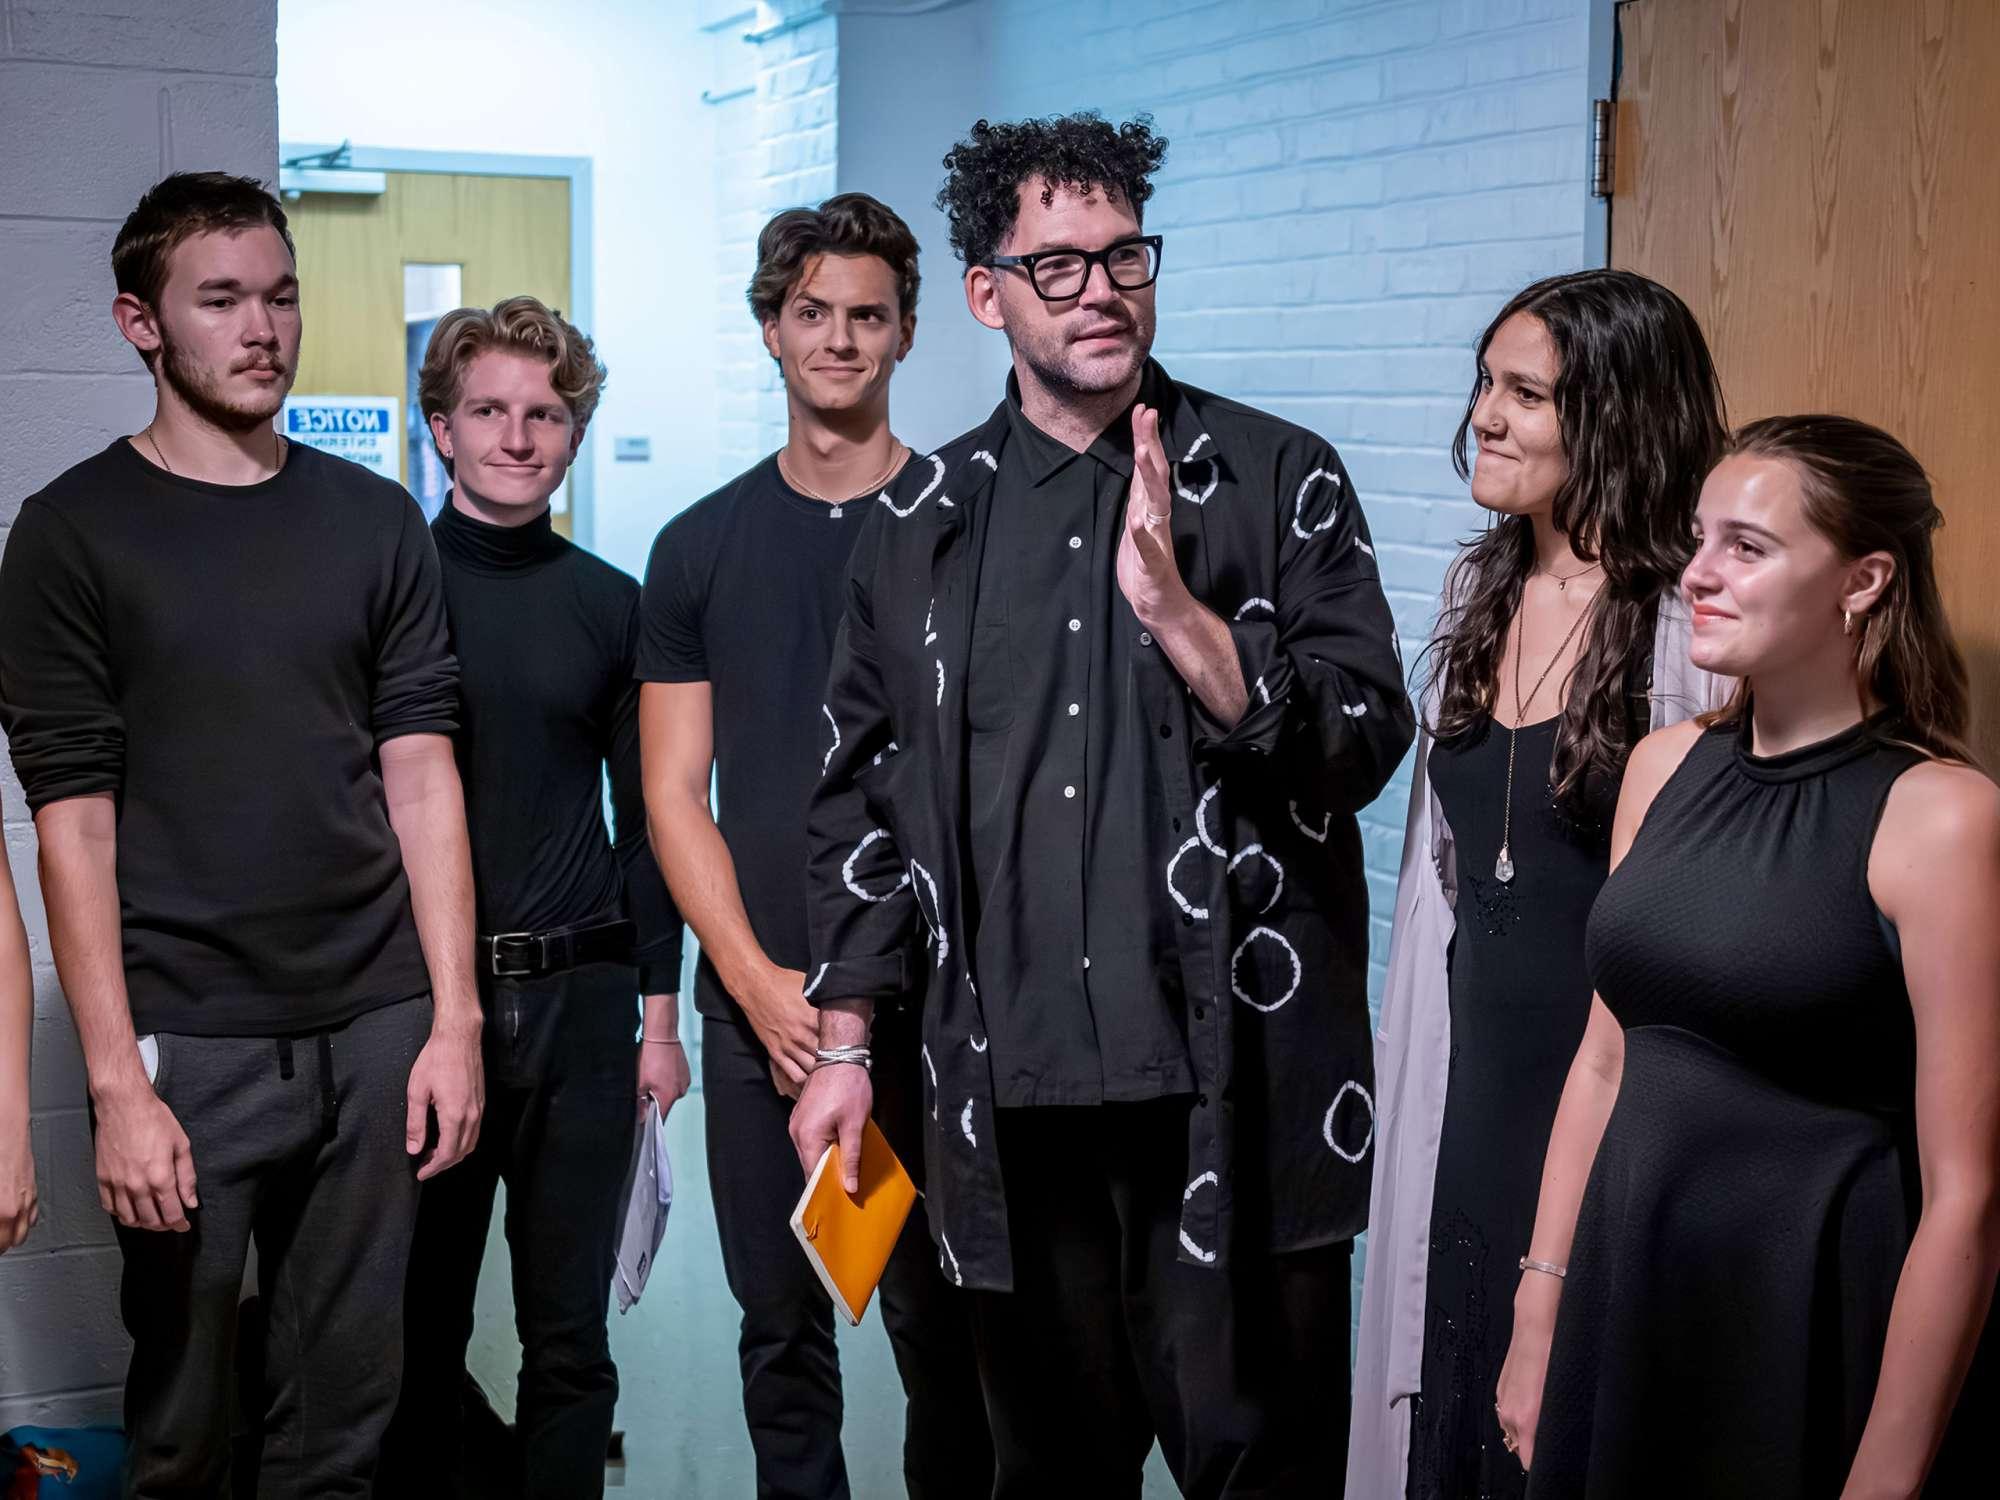 The play’s director stands in the center of five students, all dressed in black.